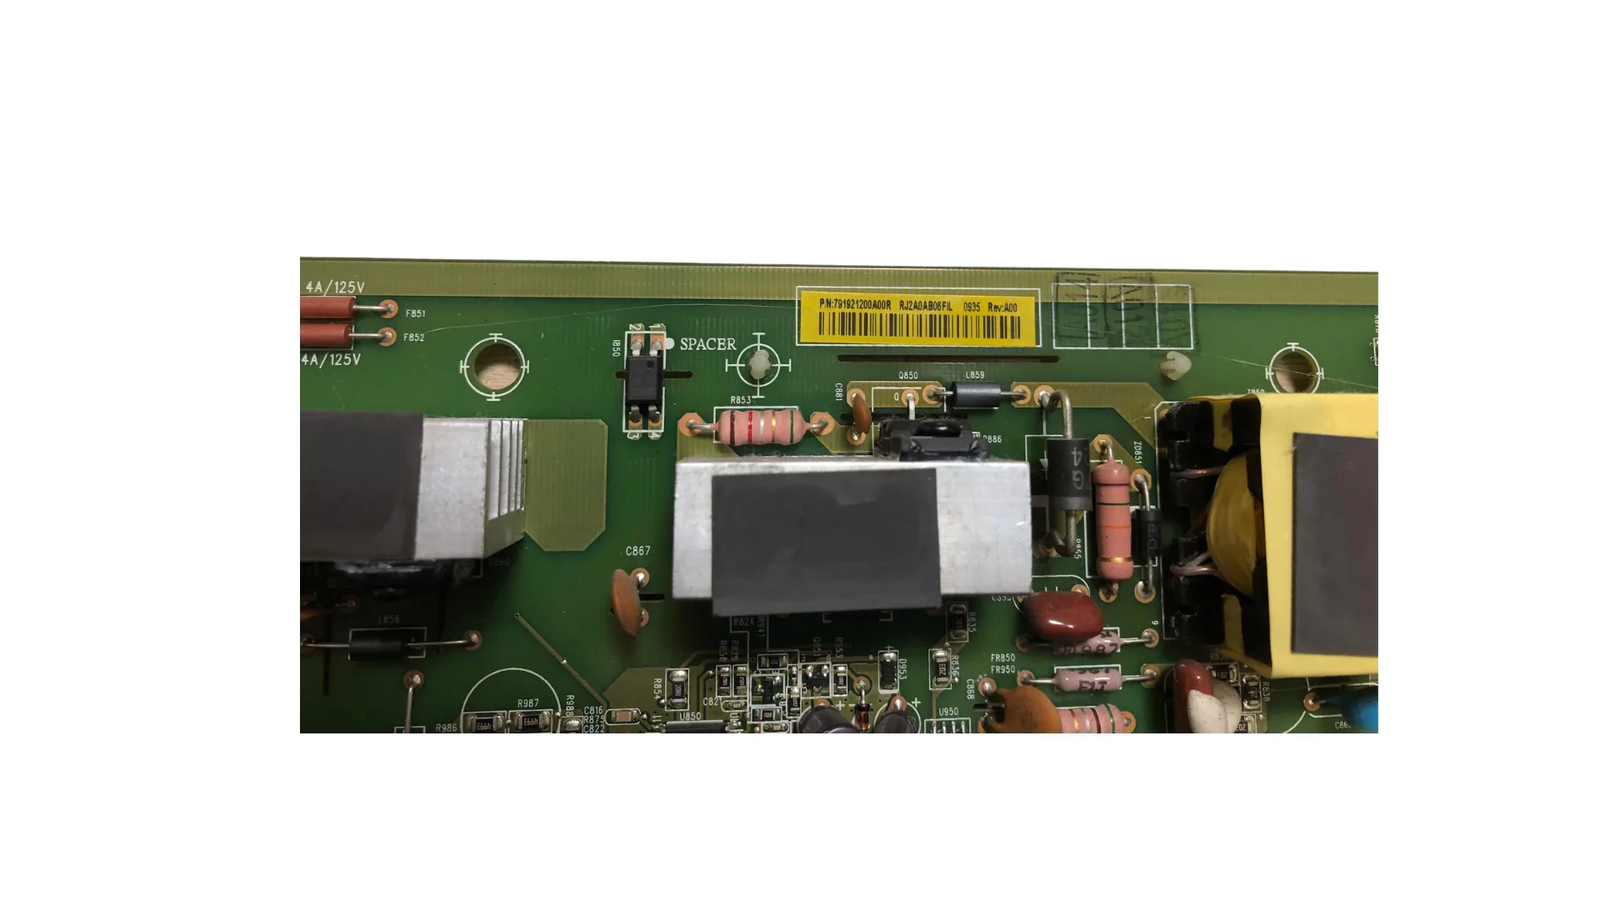 791921200A00R power supply for Dell 2209WAF monitor